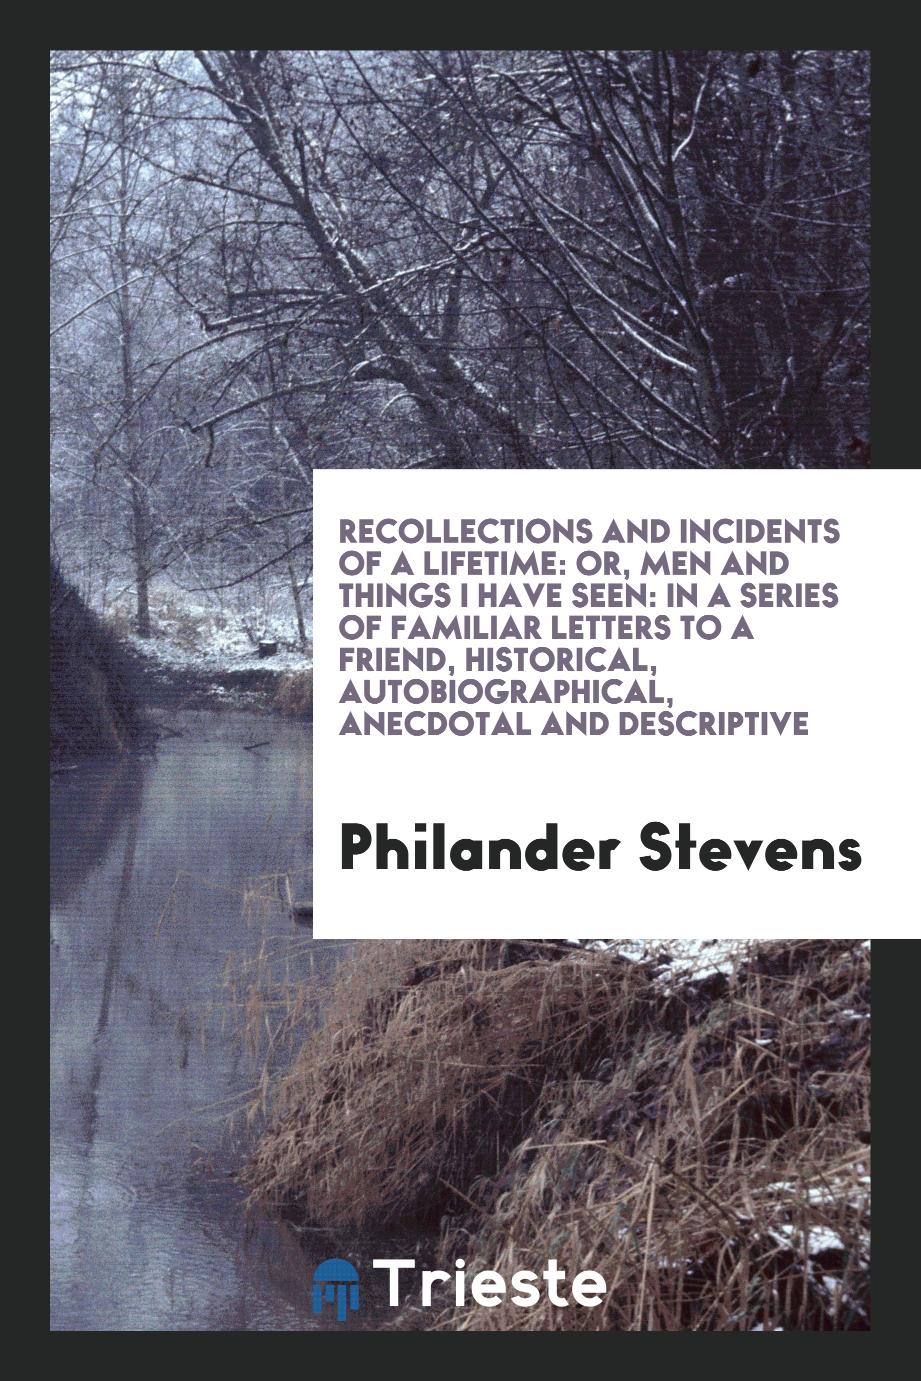 Recollections and Incidents of a Lifetime: Or, Men and Things I Have Seen: In a Series of Familiar Letters to a Friend, Historical, Autobiographical, Anecdotal and Descriptive